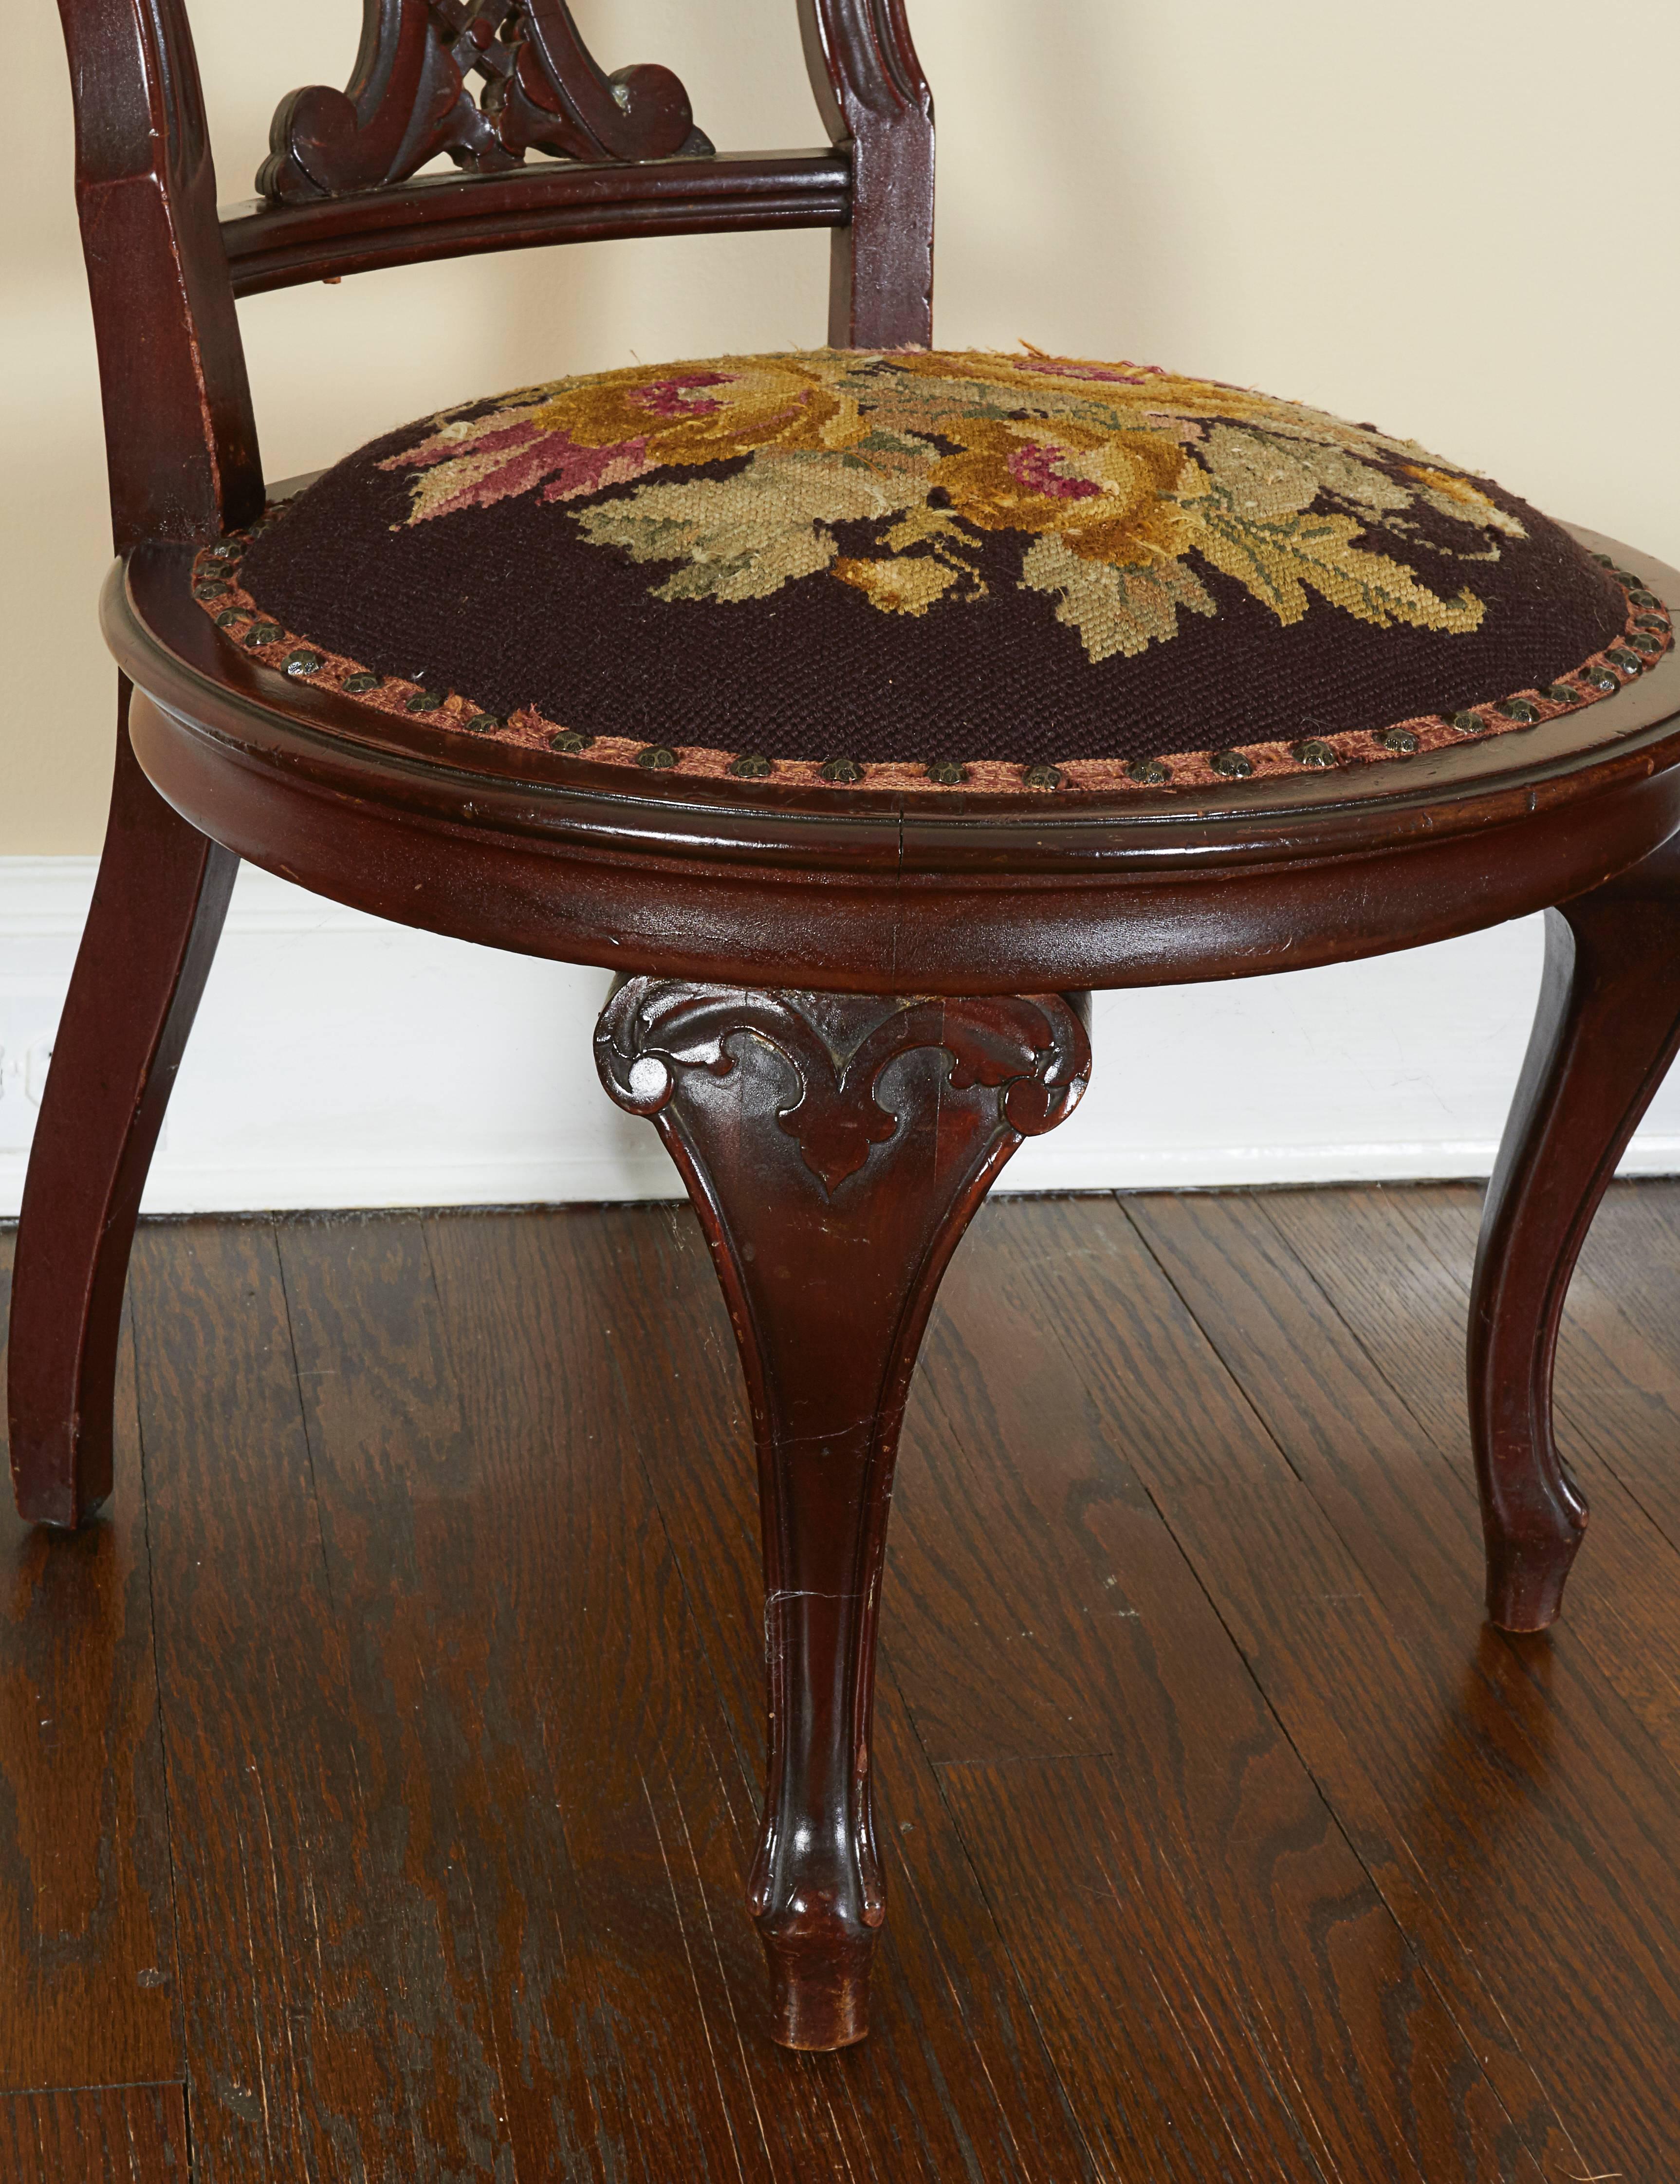 The back with elaborately pierced foliate back splat, the round floral needlework-upholstered seat raised on cabriole legs ending in pad feet on plinths. Sits low to the ground.